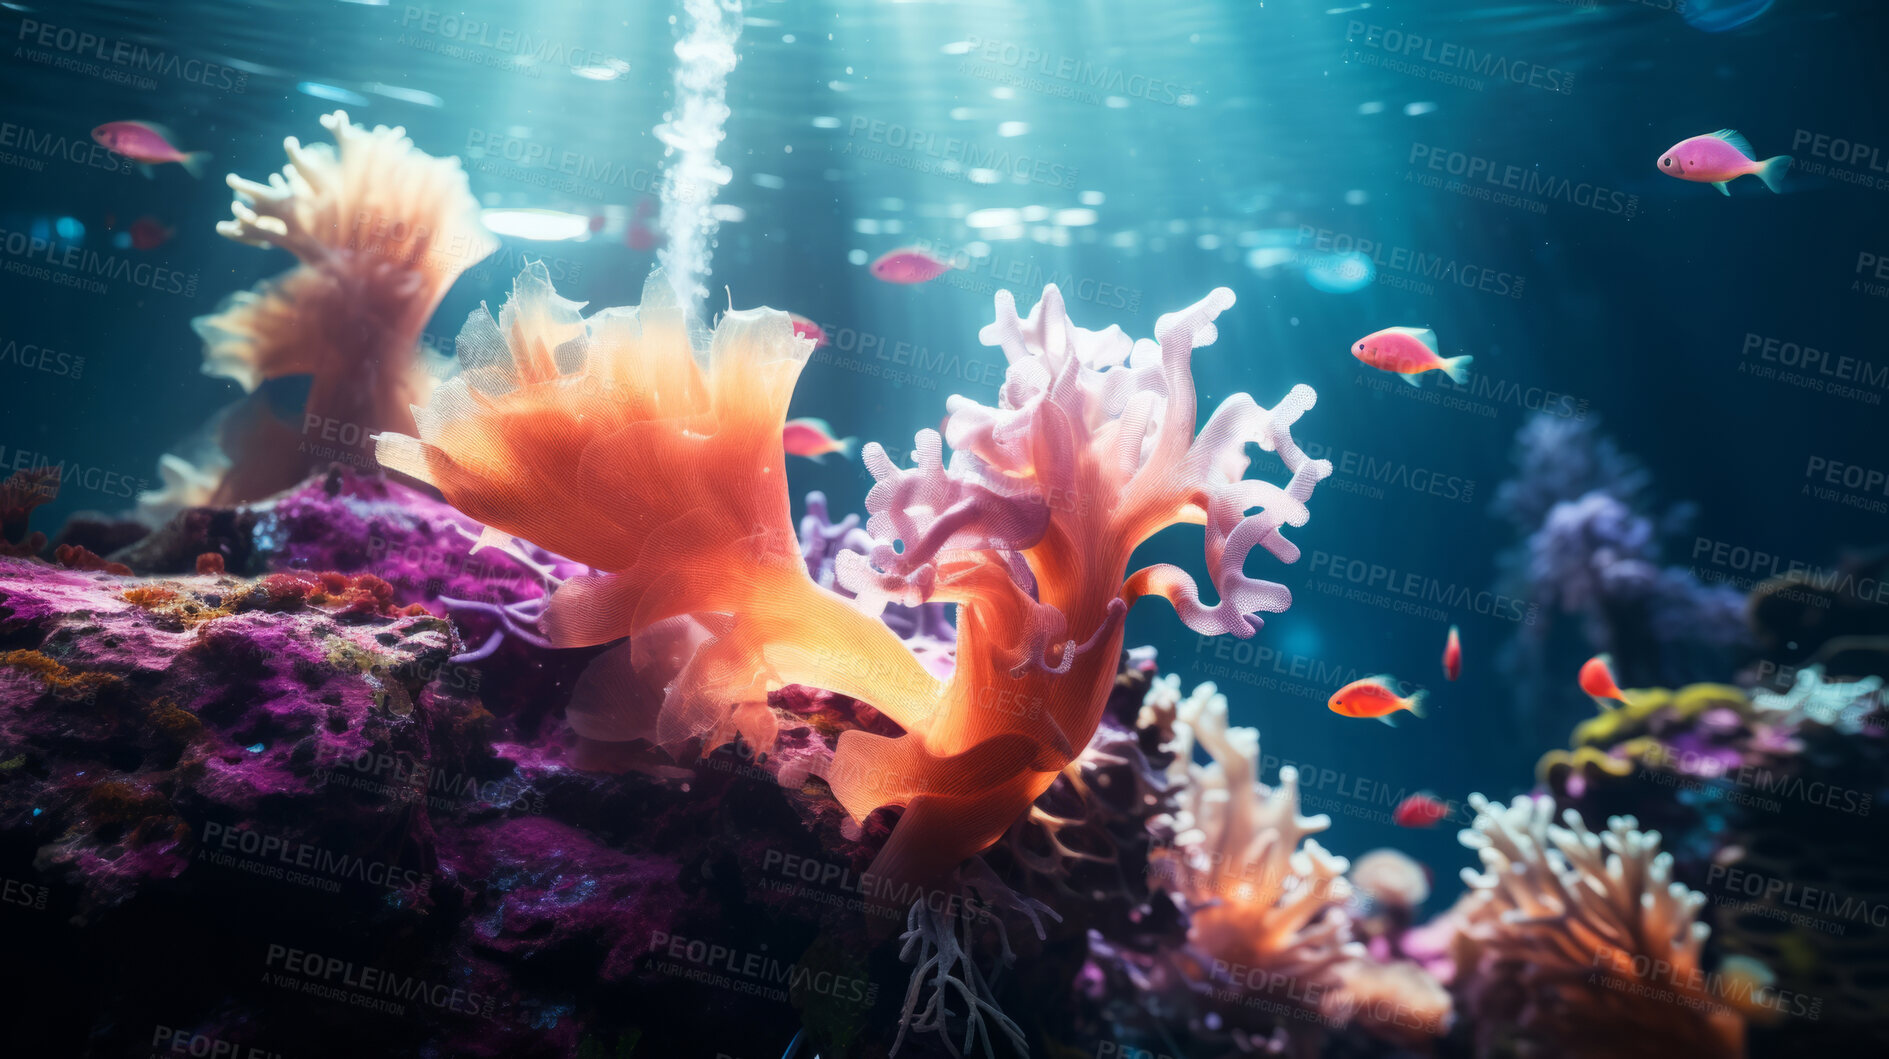 Buy stock photo Underwater scenery, various types of fish in distance. Illuminated coral reefs.